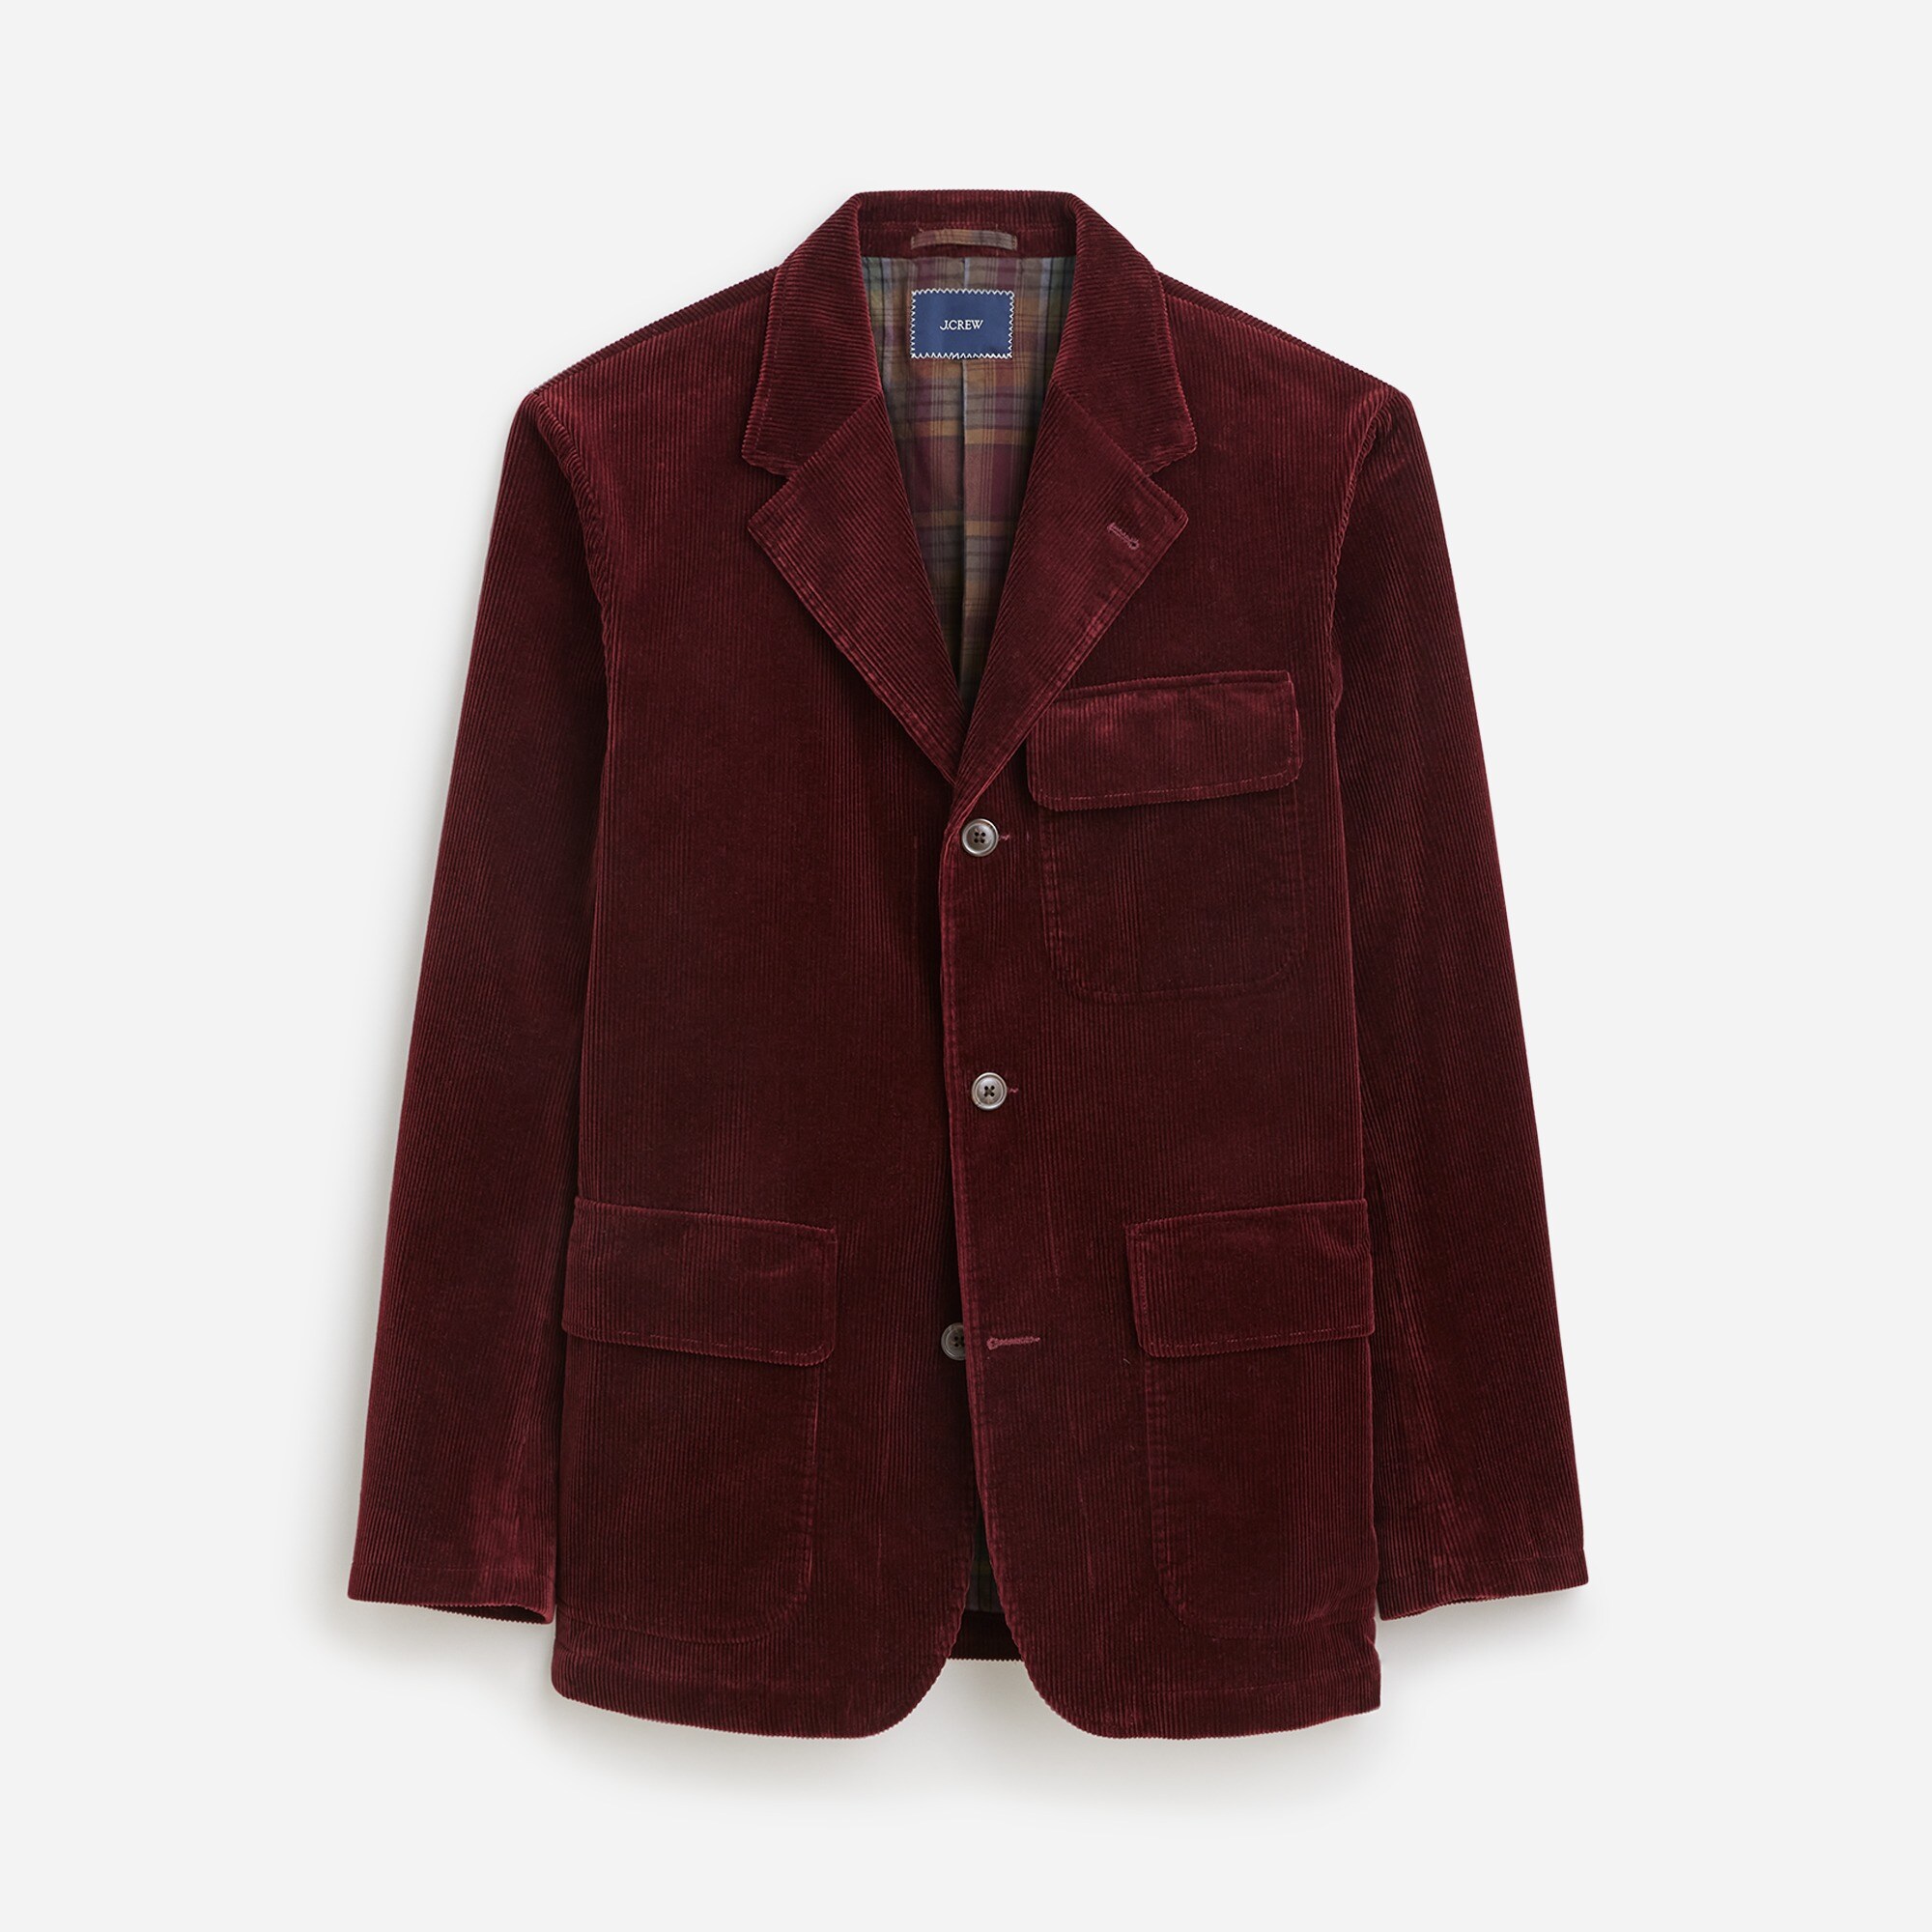  Relaxed-fit blazer in Italian cotton corduroy